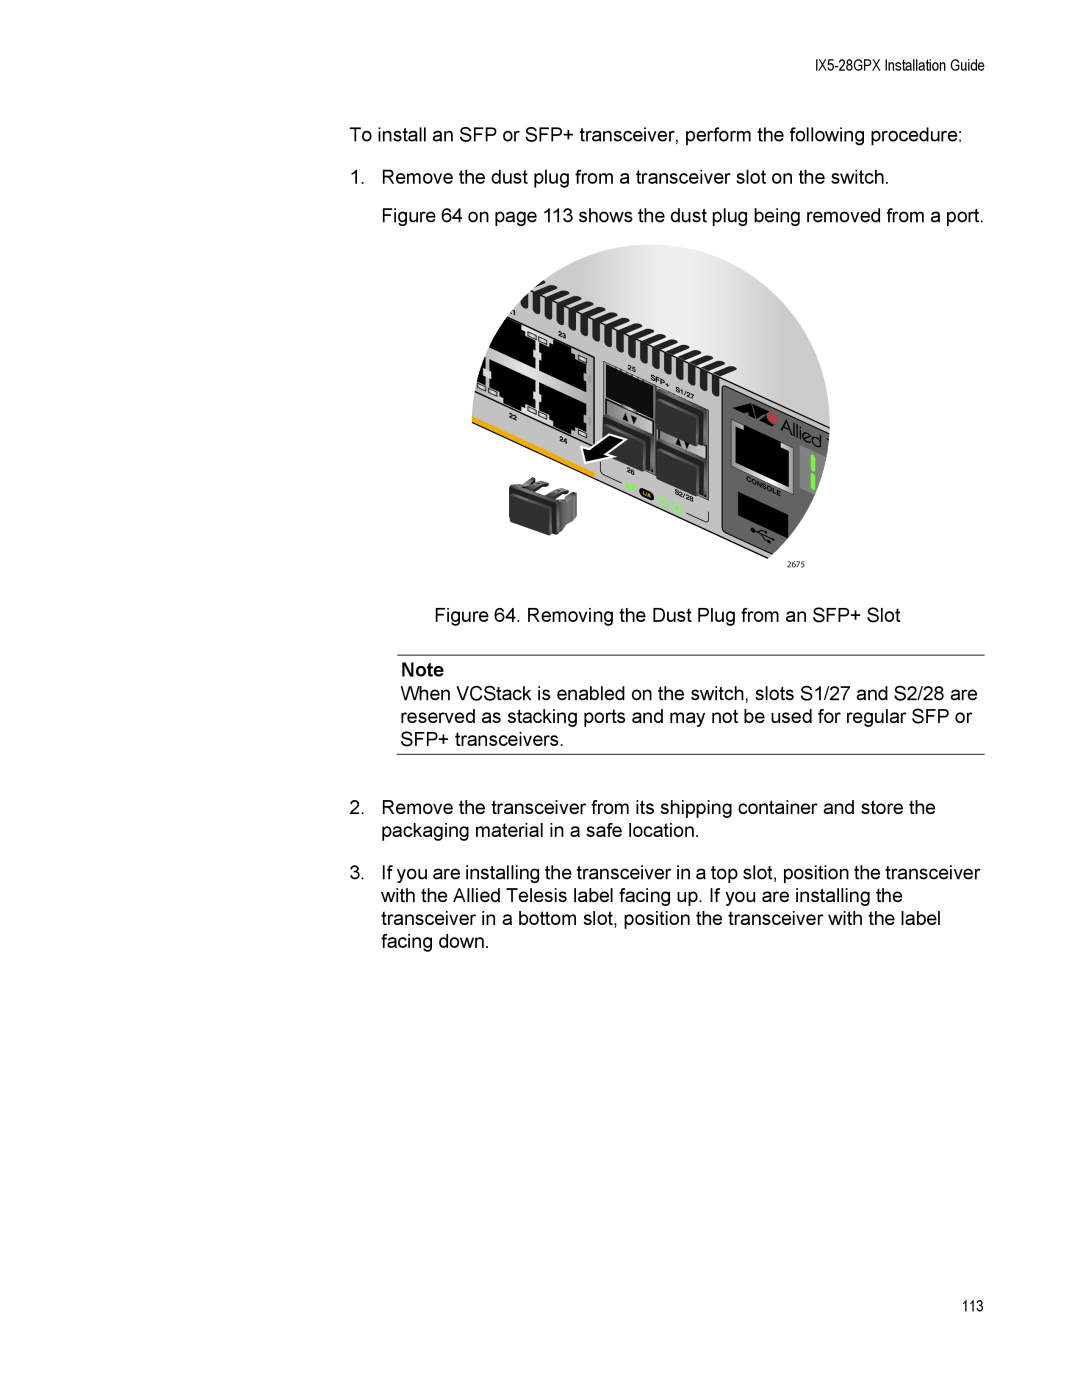 Allied Telesis AT-IX5-28GPX manual To install an SFP or SFP+ transceiver, perform the following procedure 